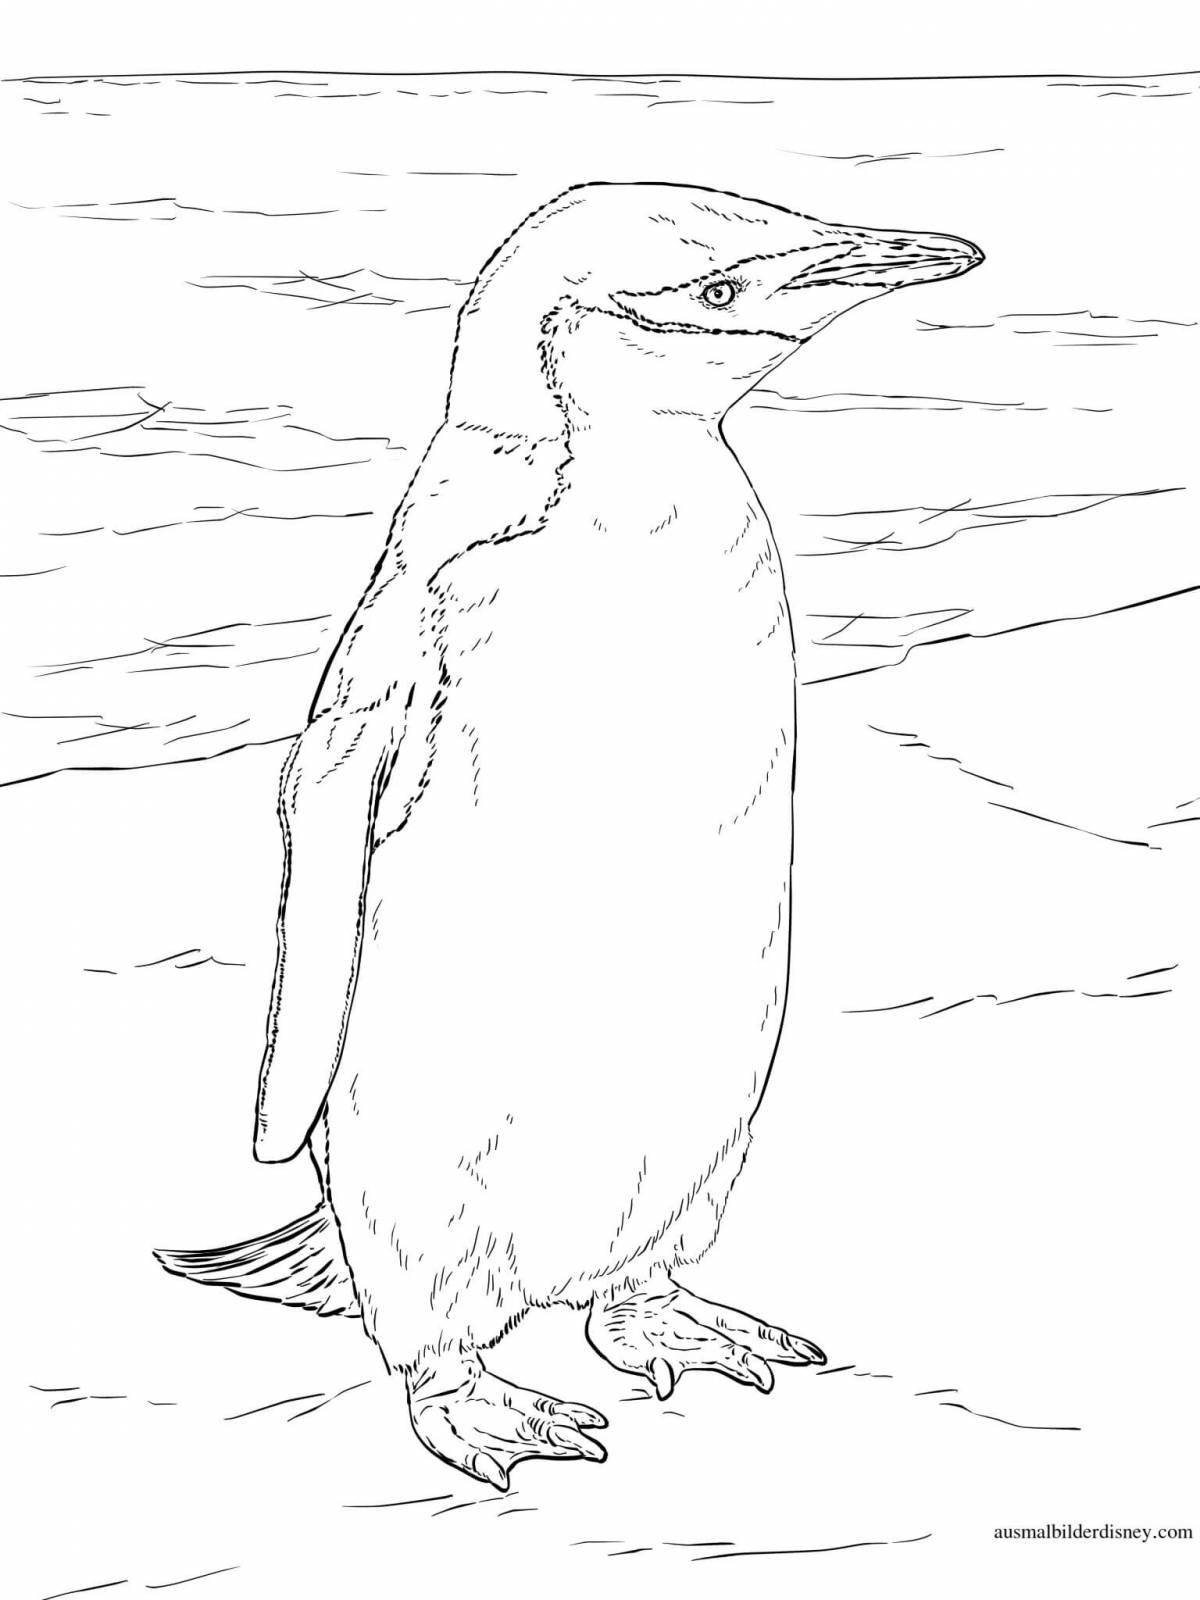 Amazing animals of Antarctica coloring pages for kids